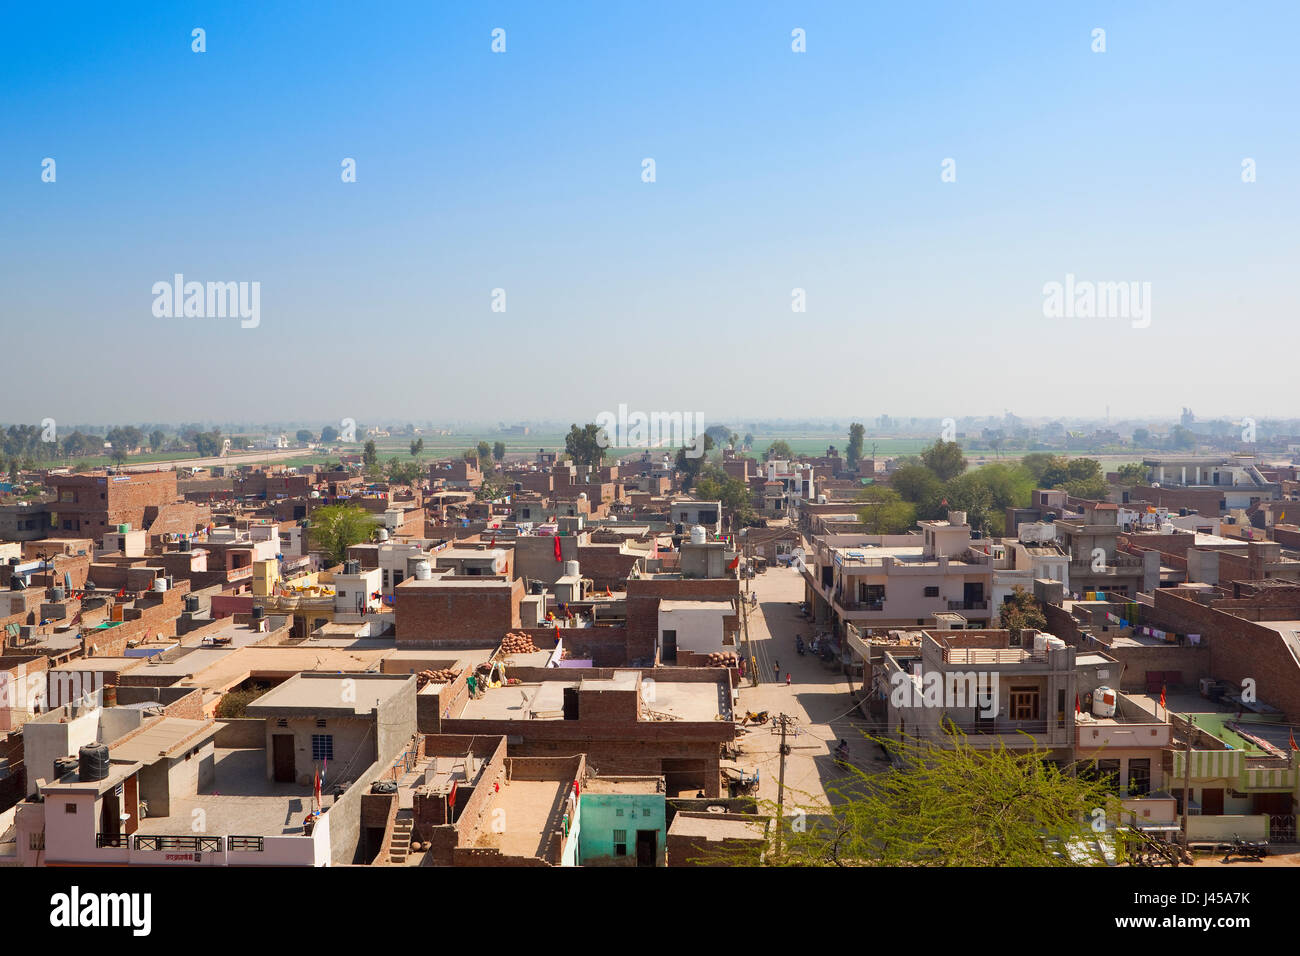 daily life in hanumangarh city with houes and shops and a view of distant countryside from bhatner fort in rajasthan india under a blue sky Stock Photo